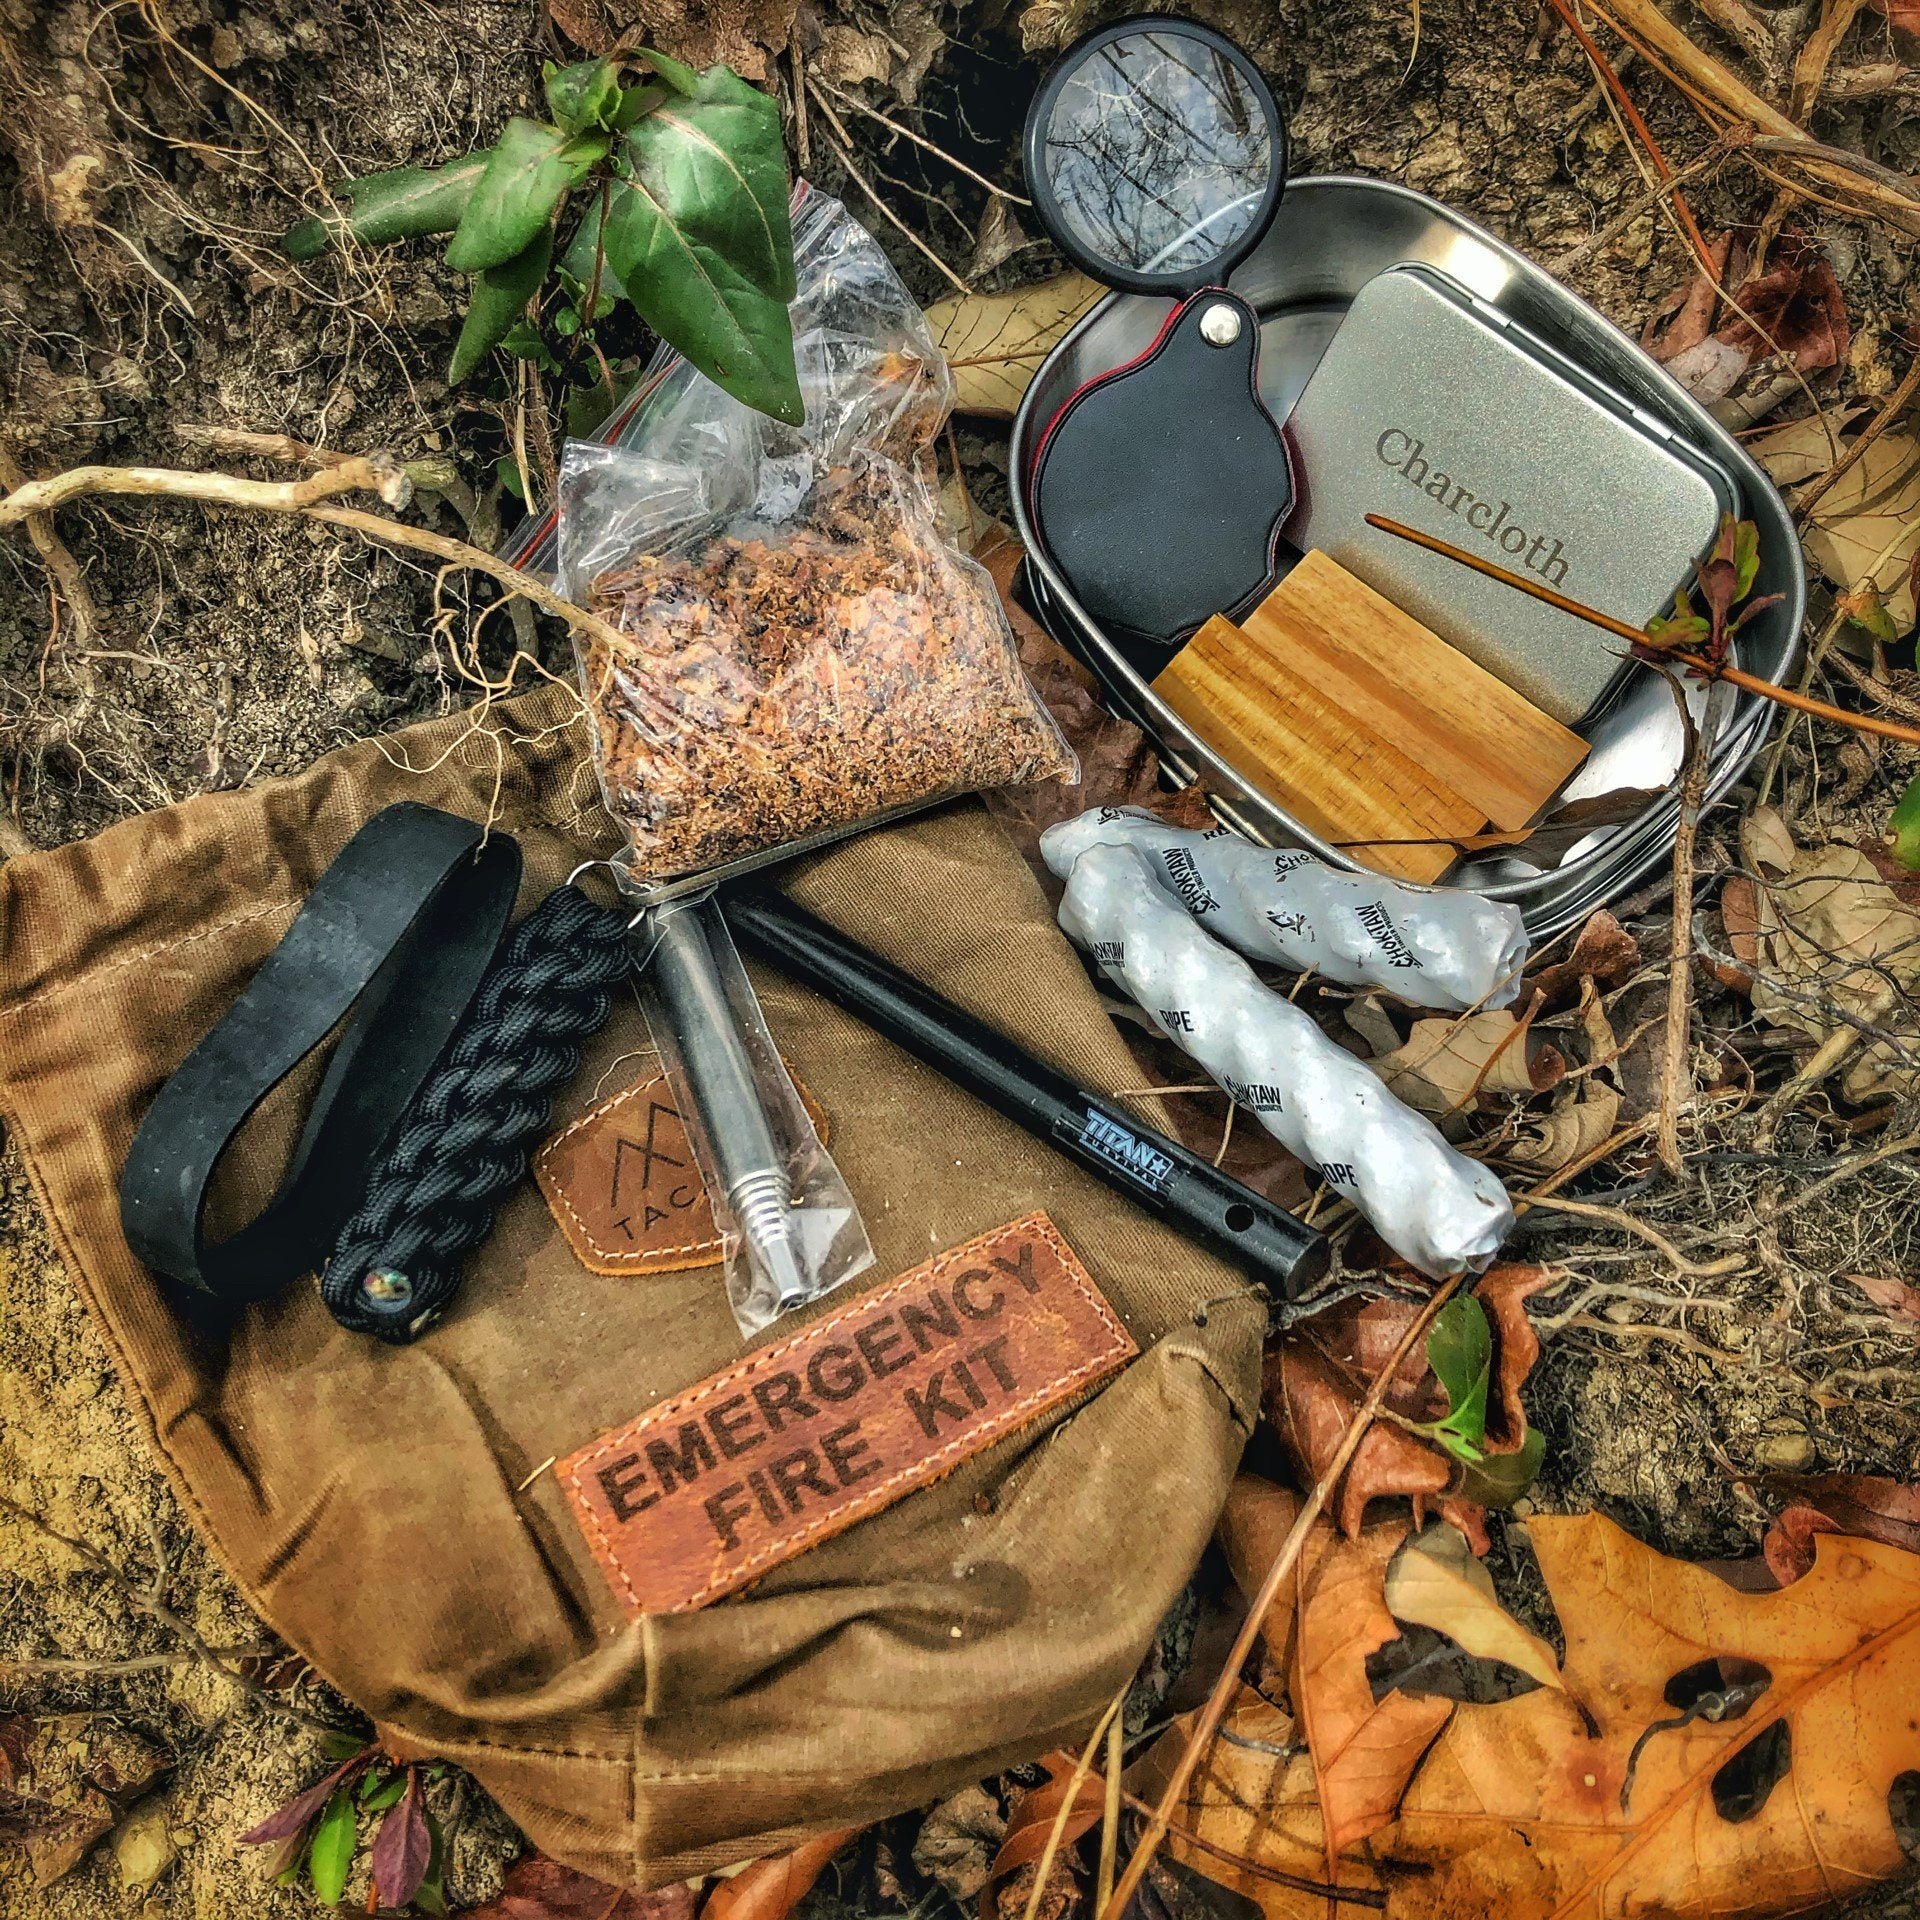 TACAMO fire kit contents including a knife and matches in a carry bag